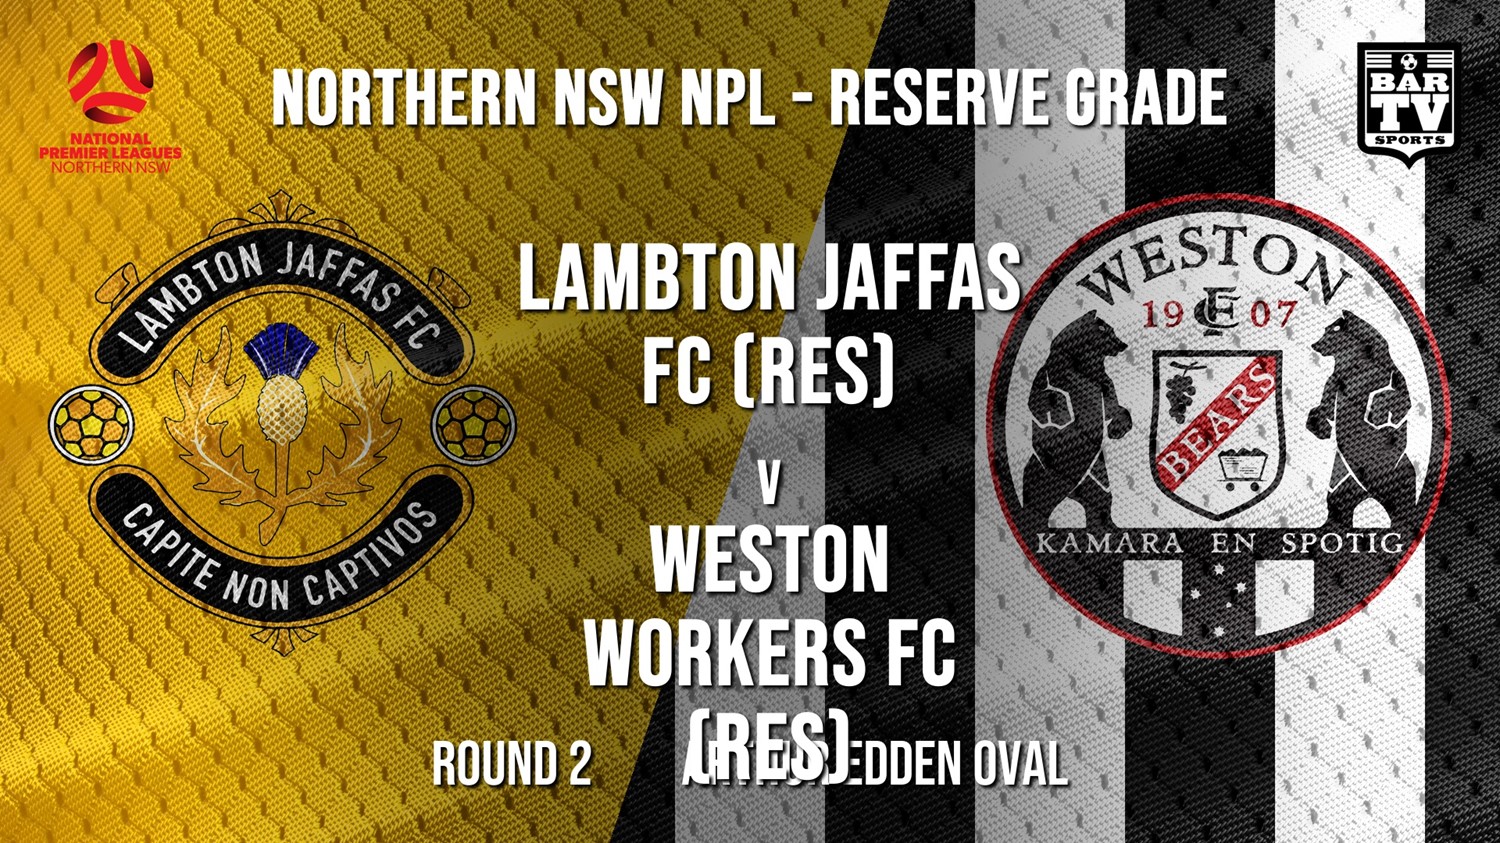 NPL NNSW RES Round 2  - Lambton Jaffas FC (Res) v Weston Workers FC (Res) Minigame Slate Image